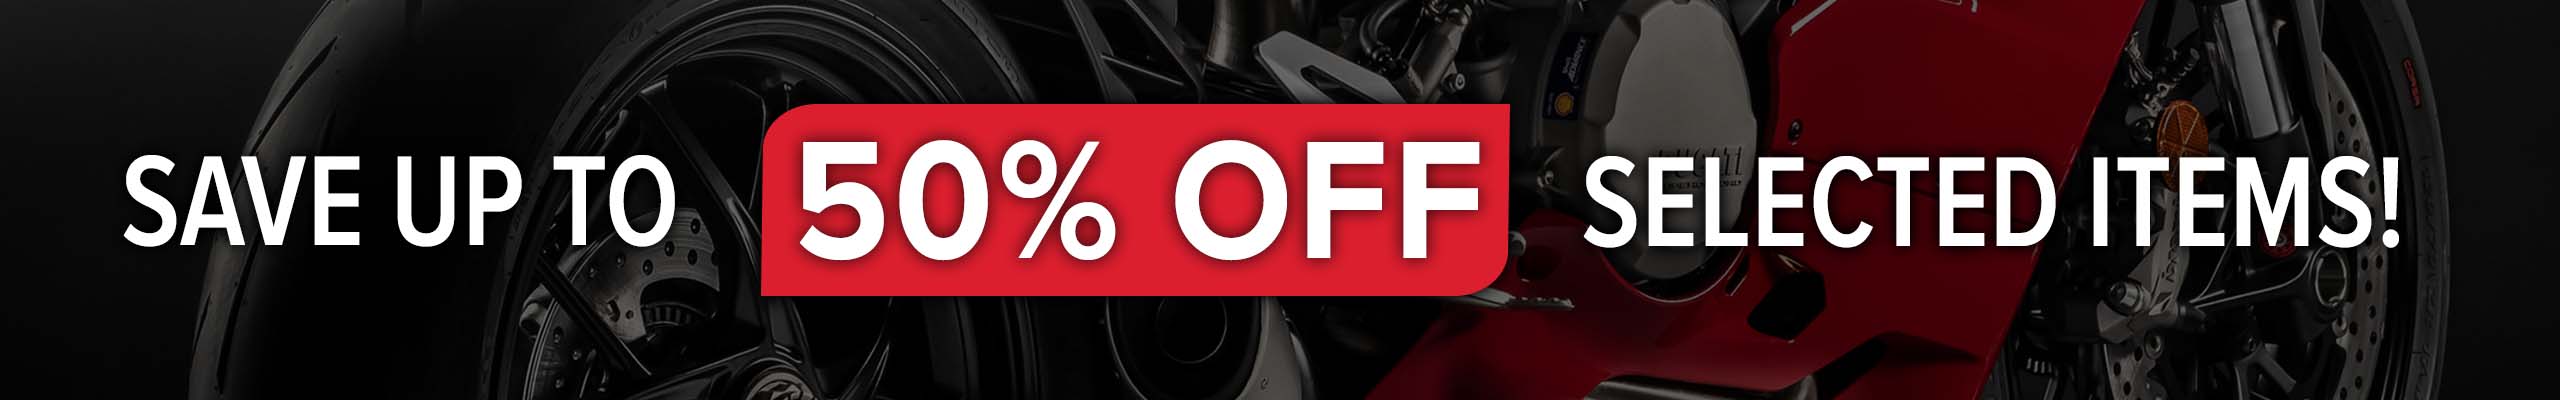 Save up to 50% off at Laguna Performance Centre this Black Friday weekend